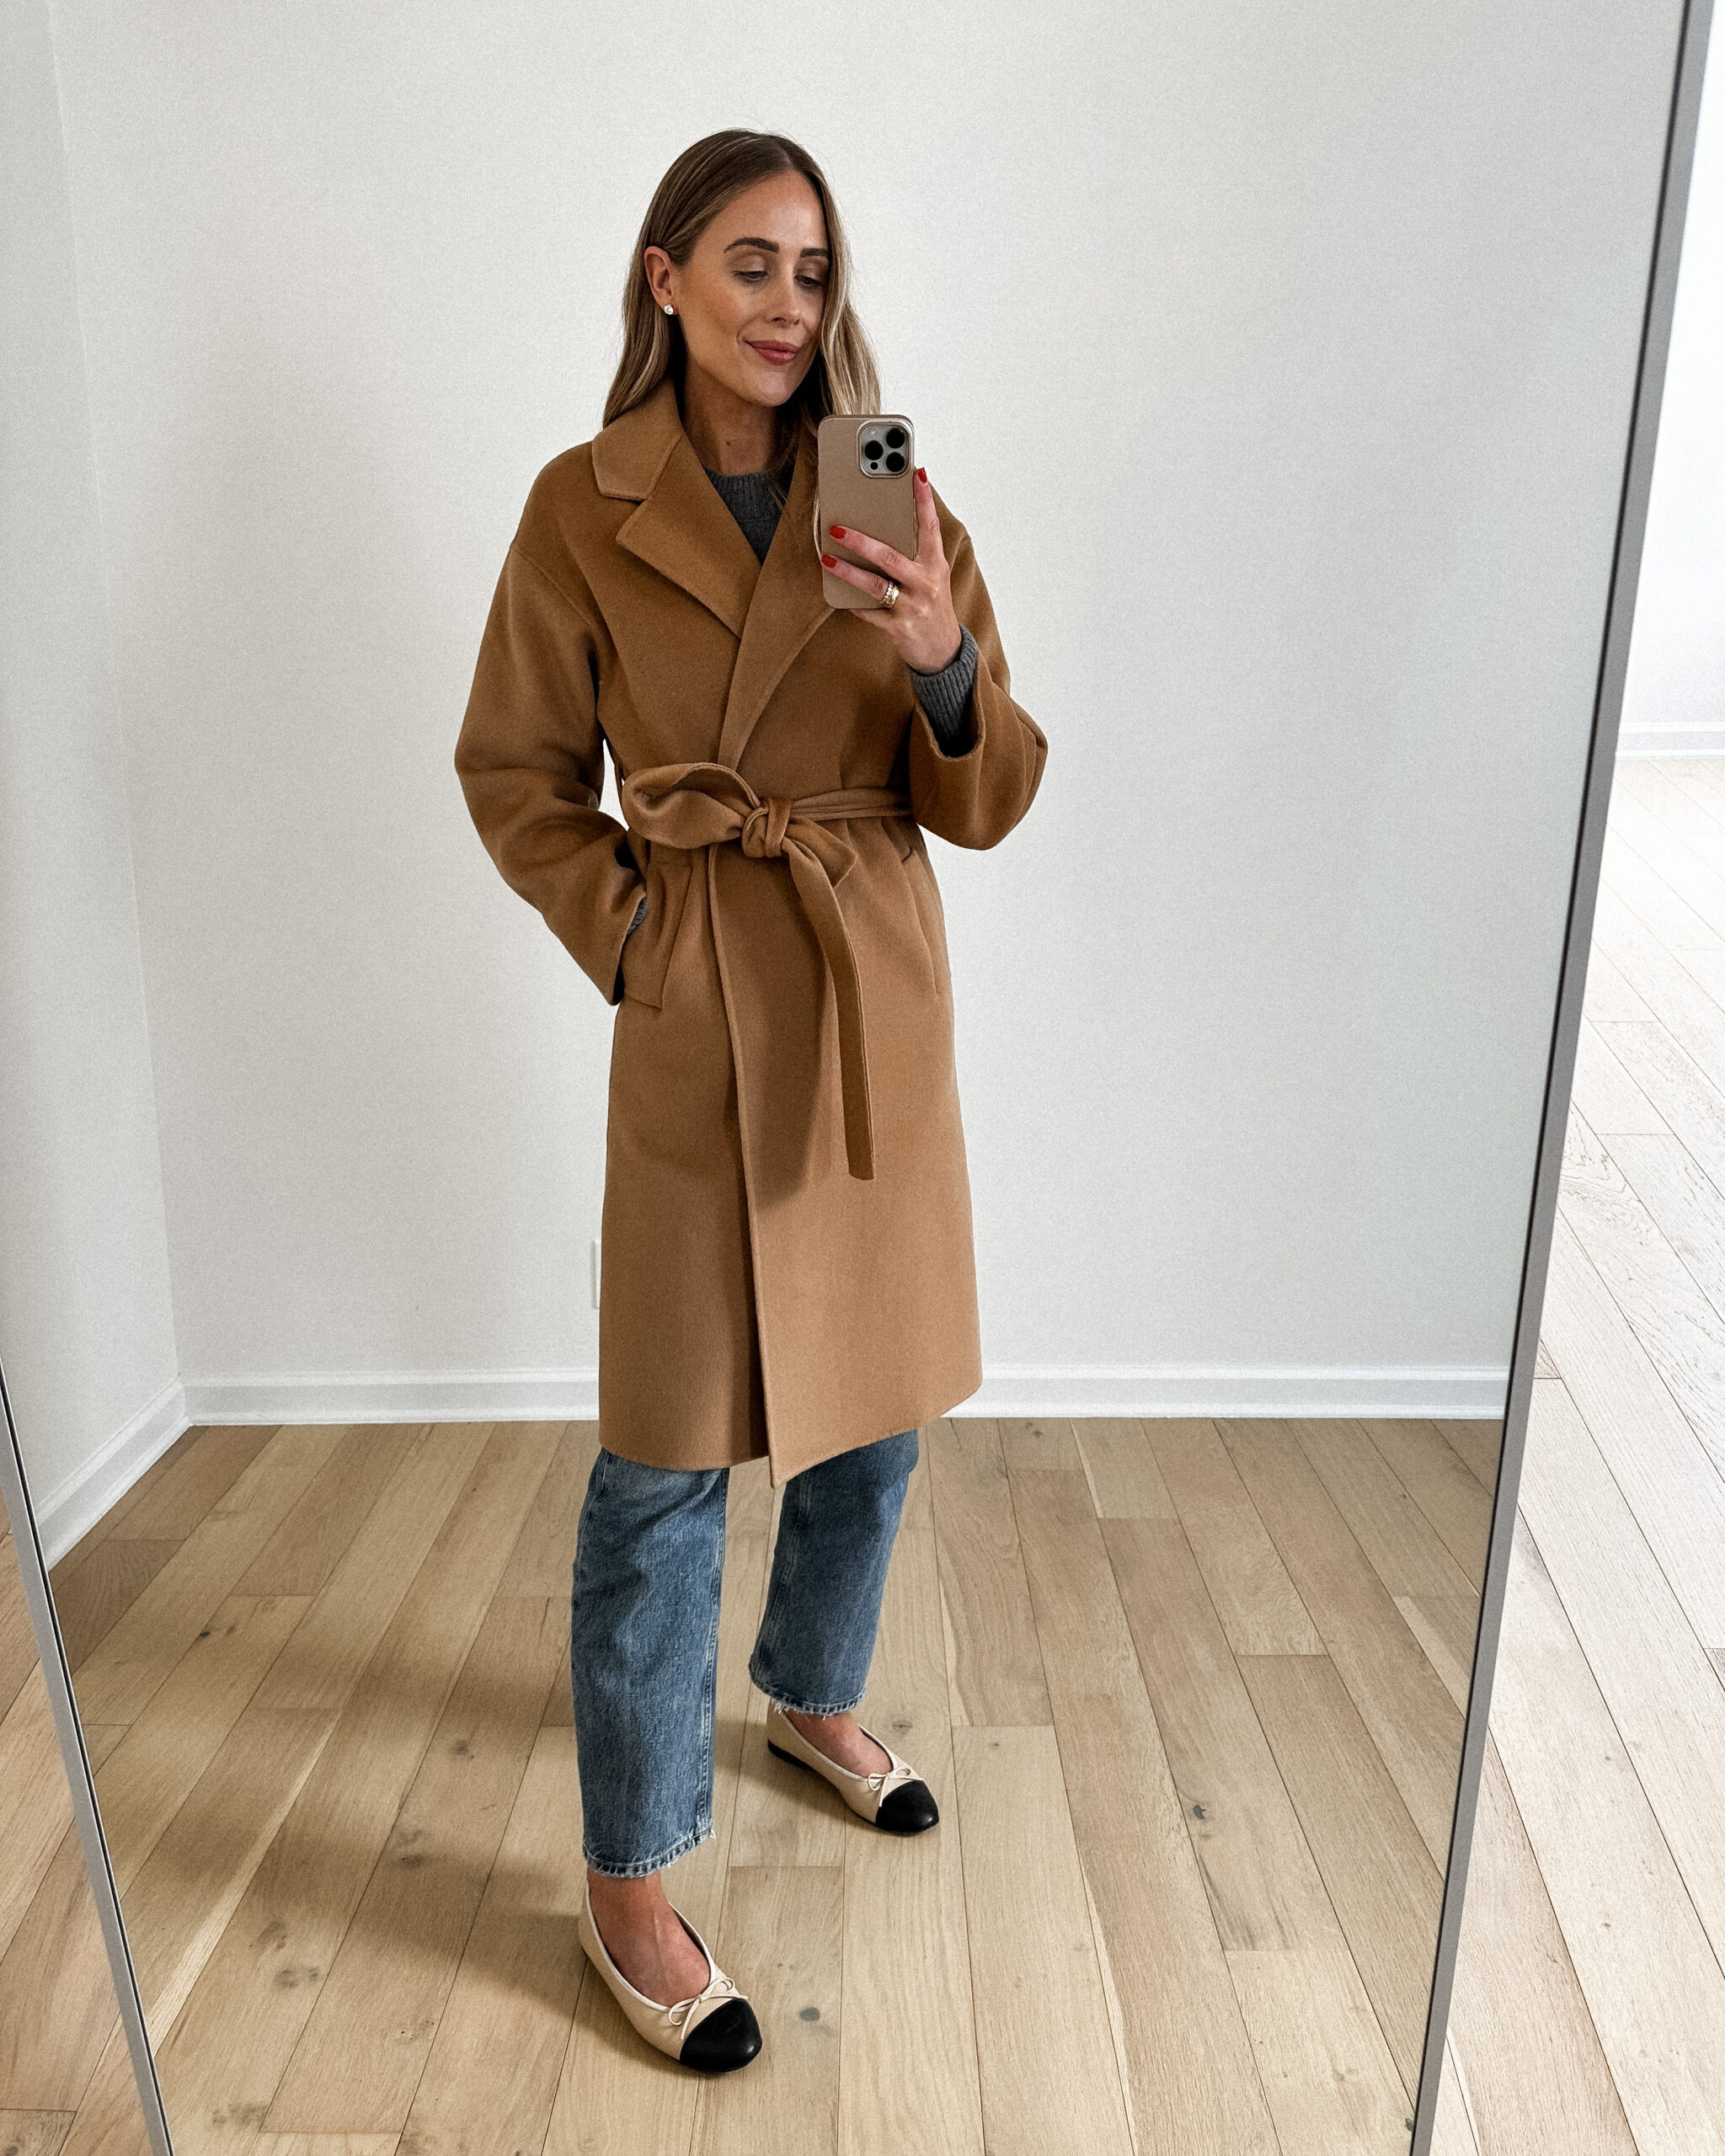 Fashion Jackson wearing MAYSON the label Camel Wool Cashmere Double Faced Wrap Coat, Grey sweater, AGOLDE denim jeans, chanel ballet flats, fall casual outfit idea